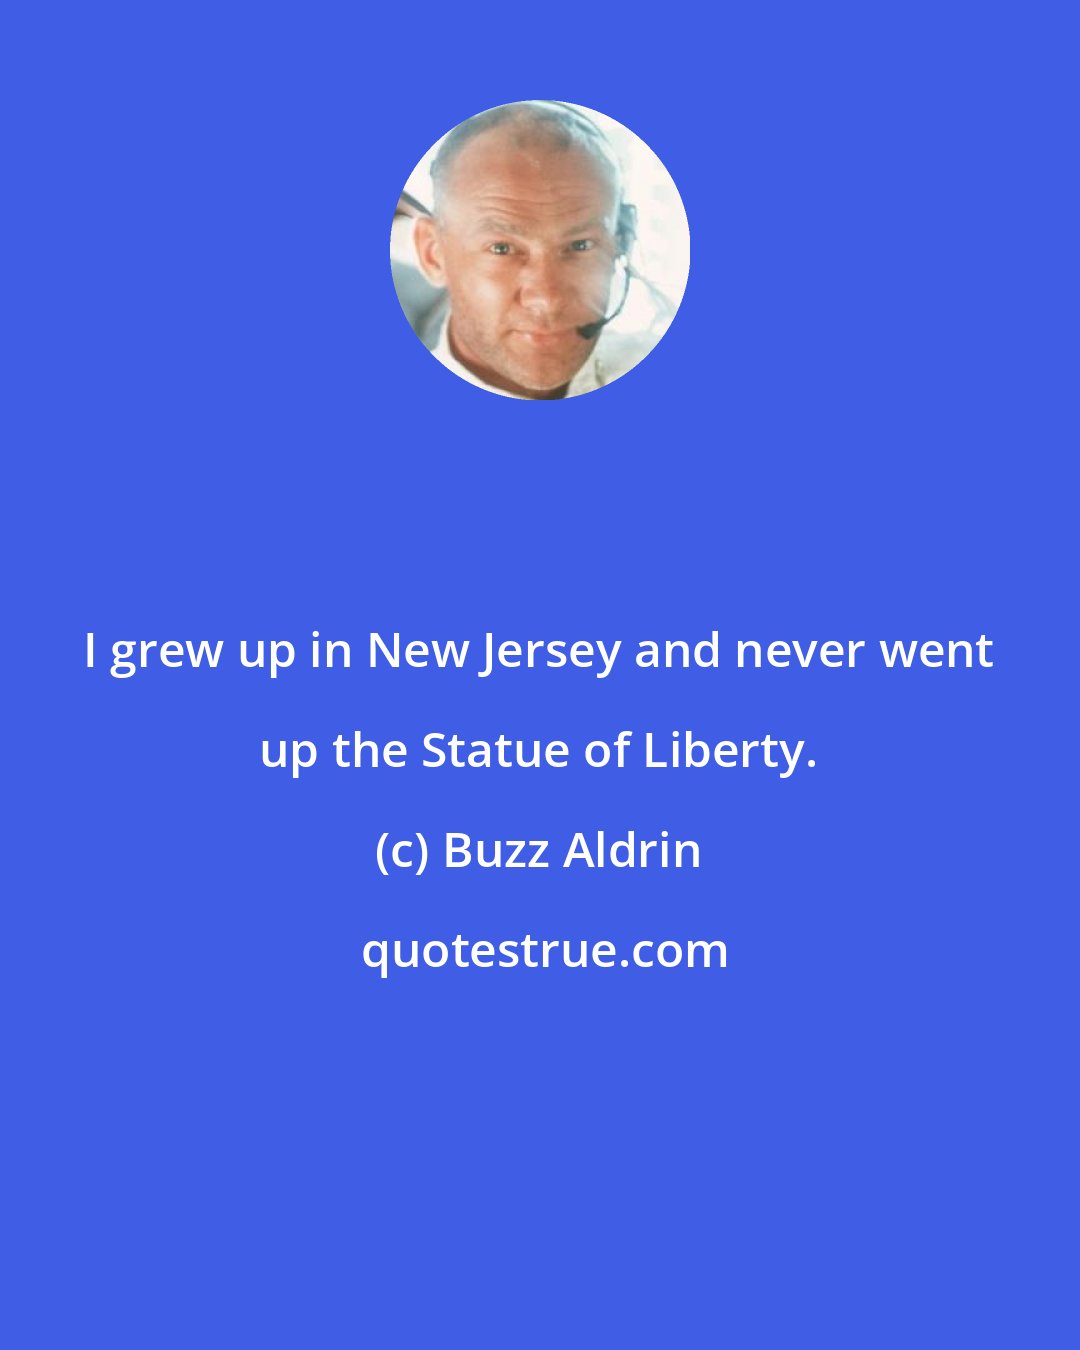 Buzz Aldrin: I grew up in New Jersey and never went up the Statue of Liberty.